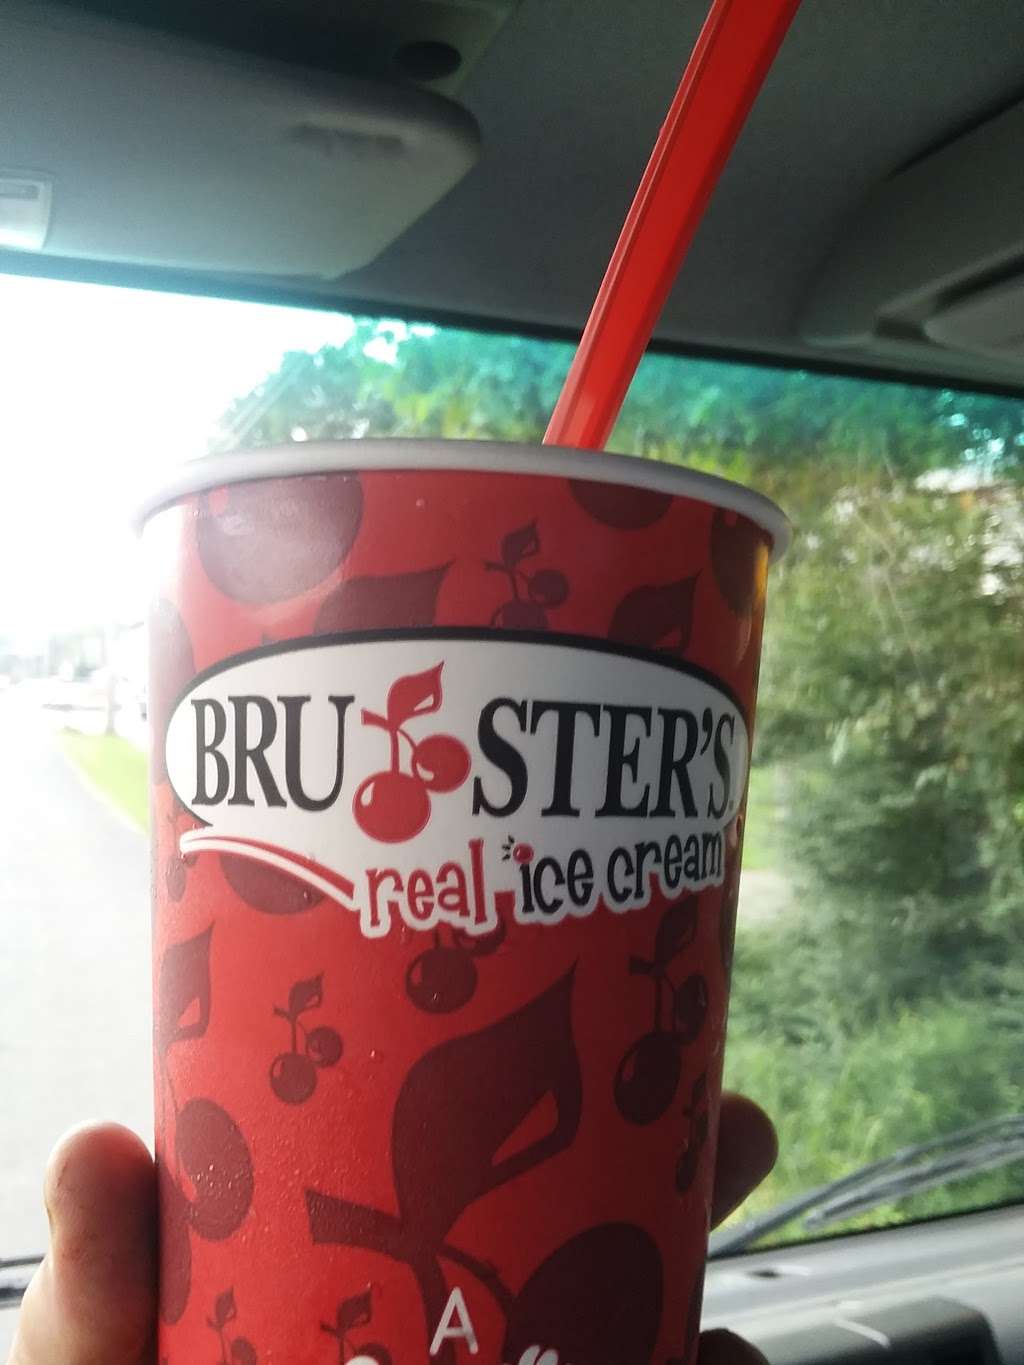 Brusters Real Ice Cream | 23825 Mervell Dean Rd, Hollywood, MD 20636 | Phone: (301) 373-5000